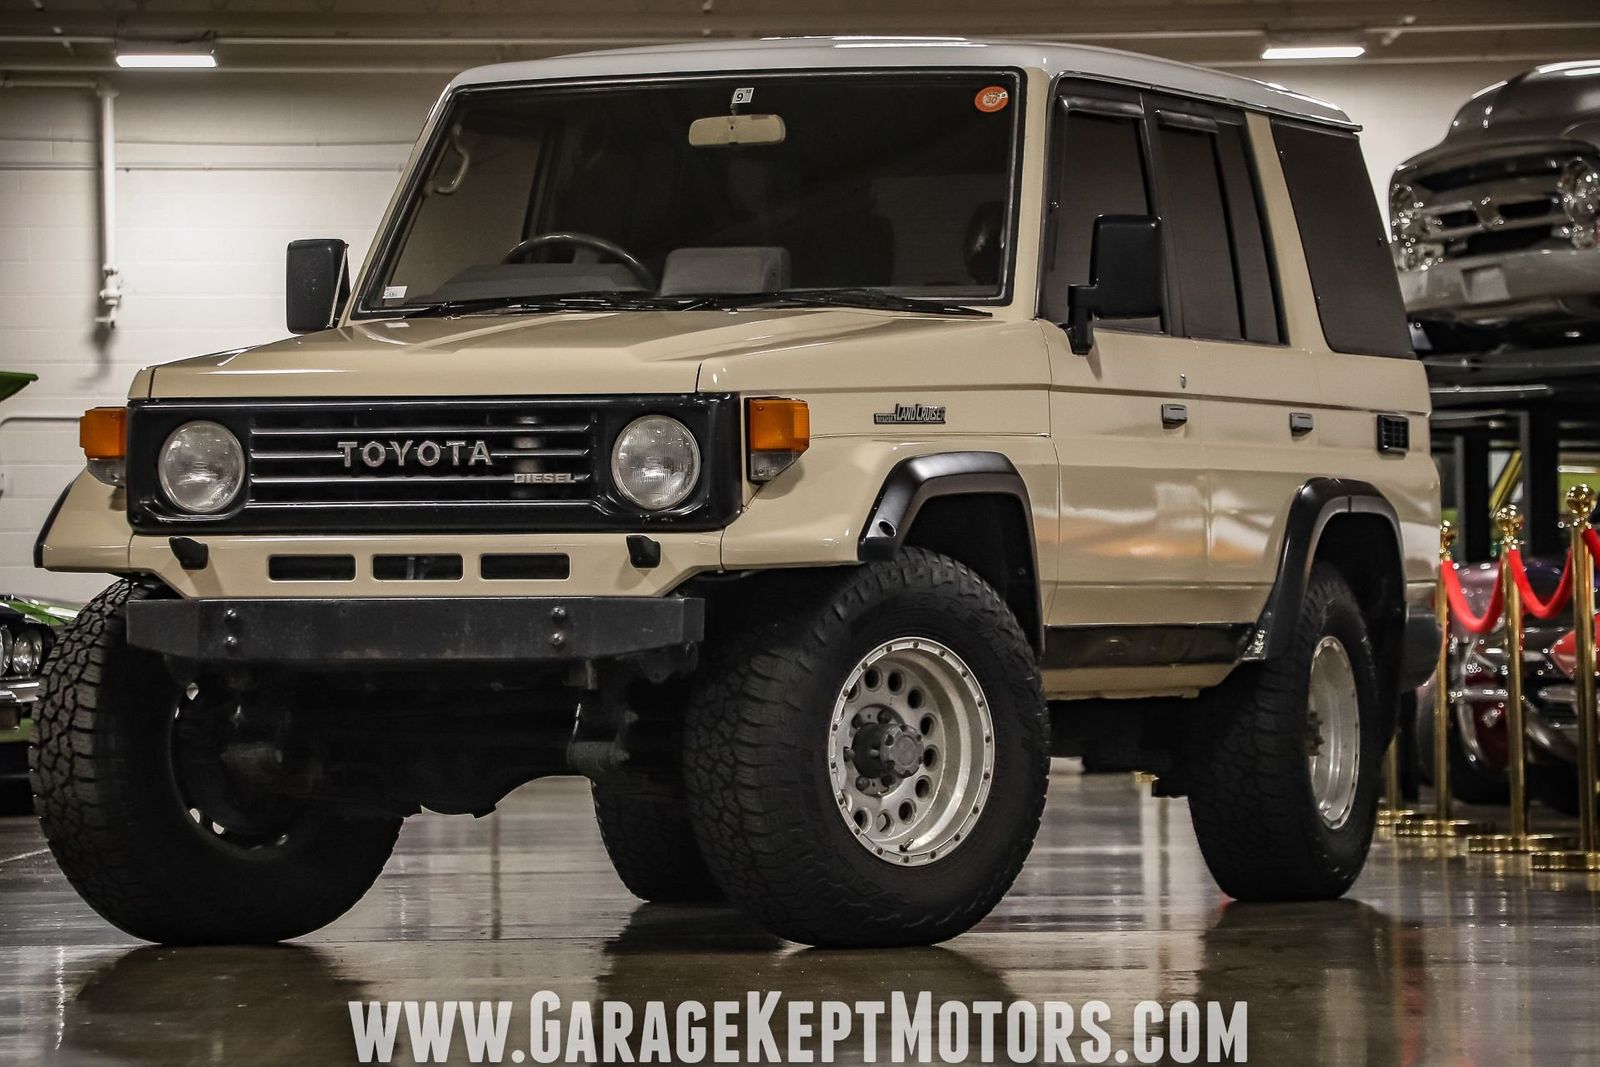 1992 Toyota Land Cruiser Is A JDM Off-Roader